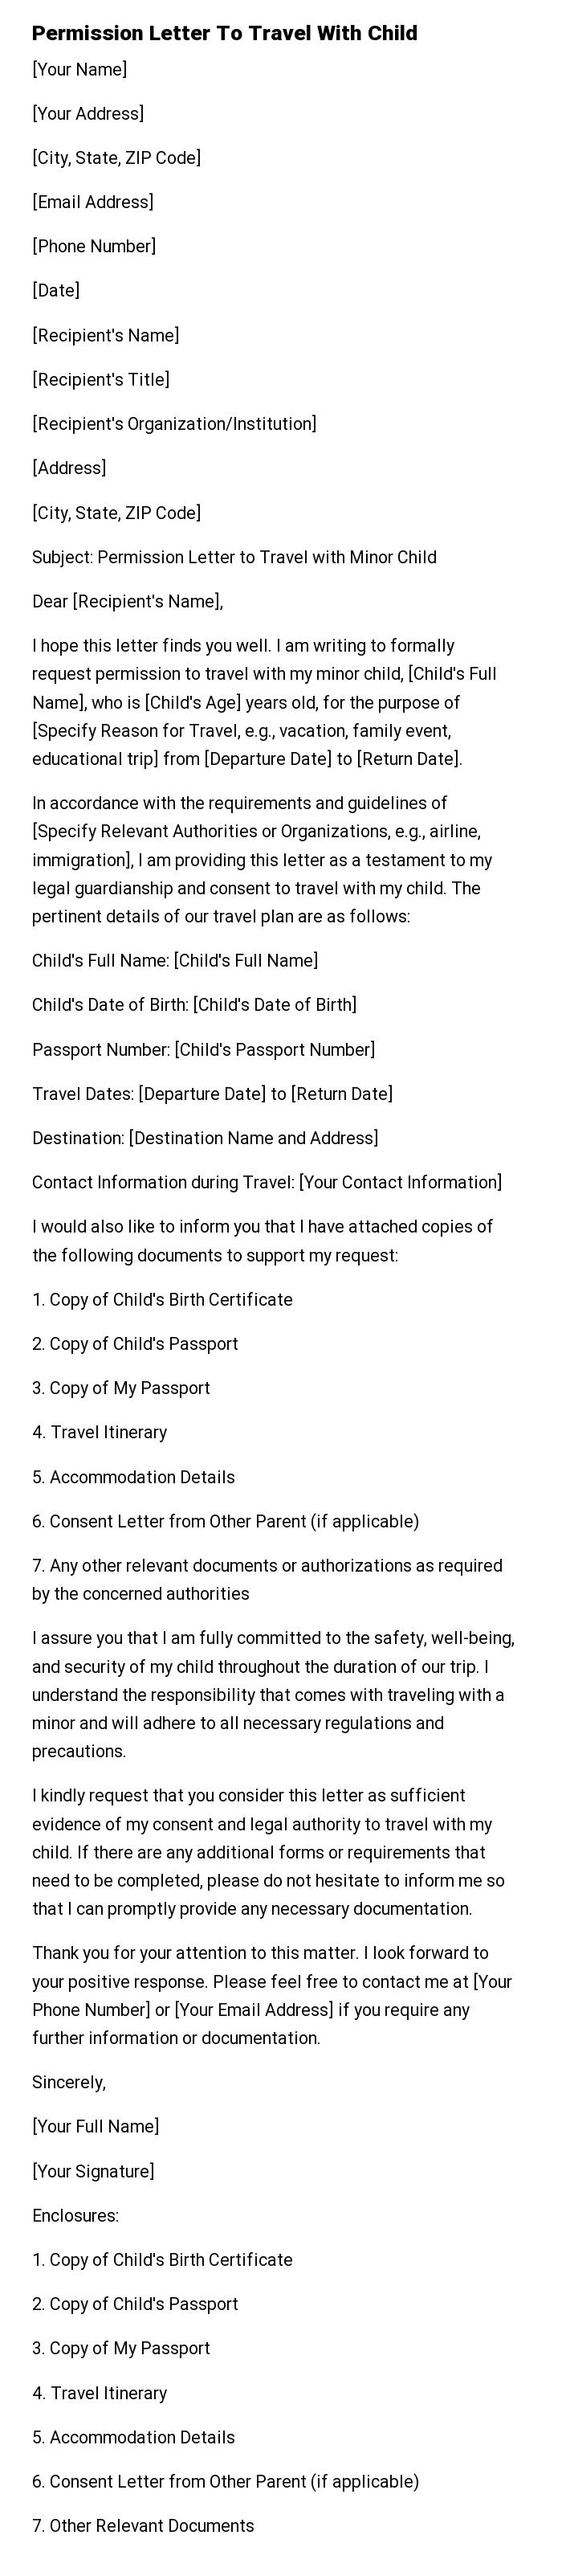 Permission Letter To Travel With Child